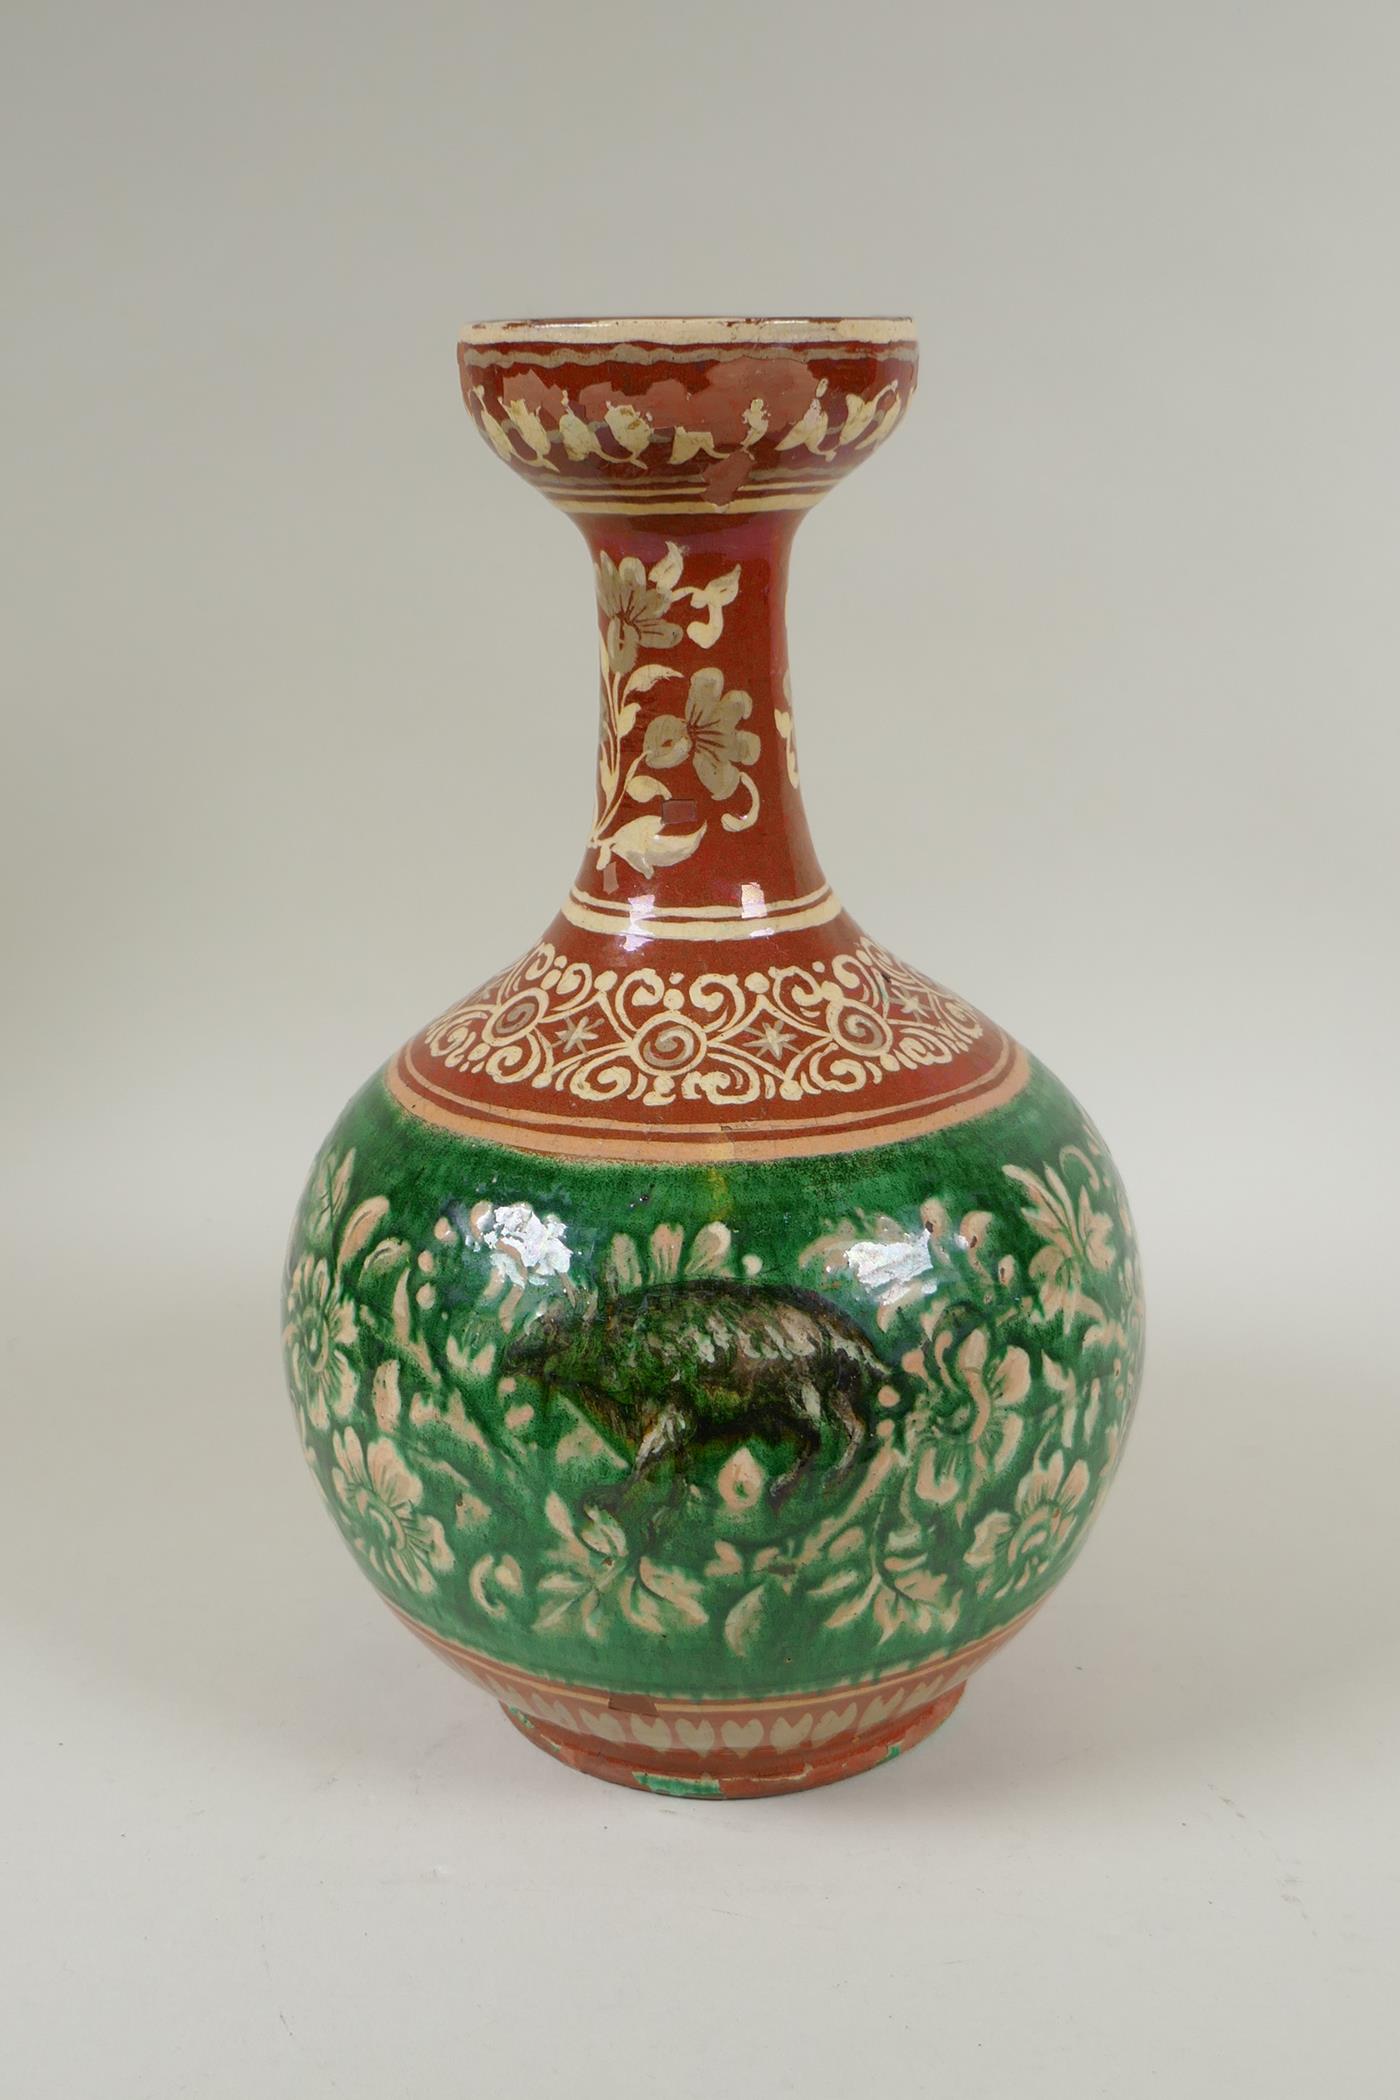 An antique Islamic redware vase decorated with flowers and rodents, chips to glaze, 27cm high - Image 2 of 6